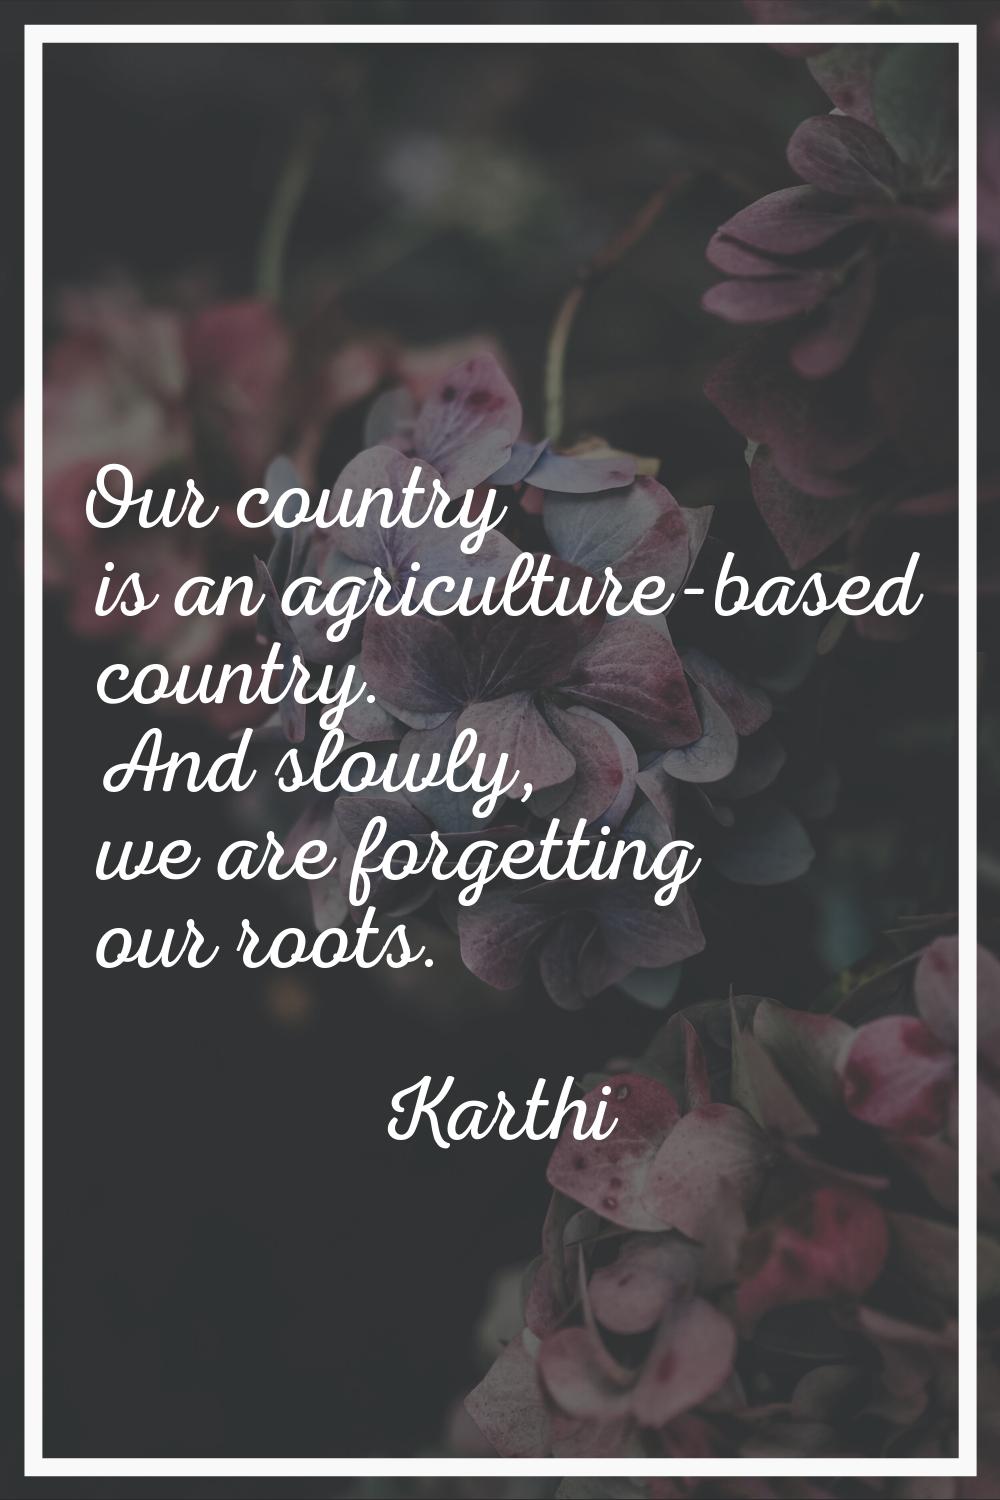 Our country is an agriculture-based country. And slowly, we are forgetting our roots.